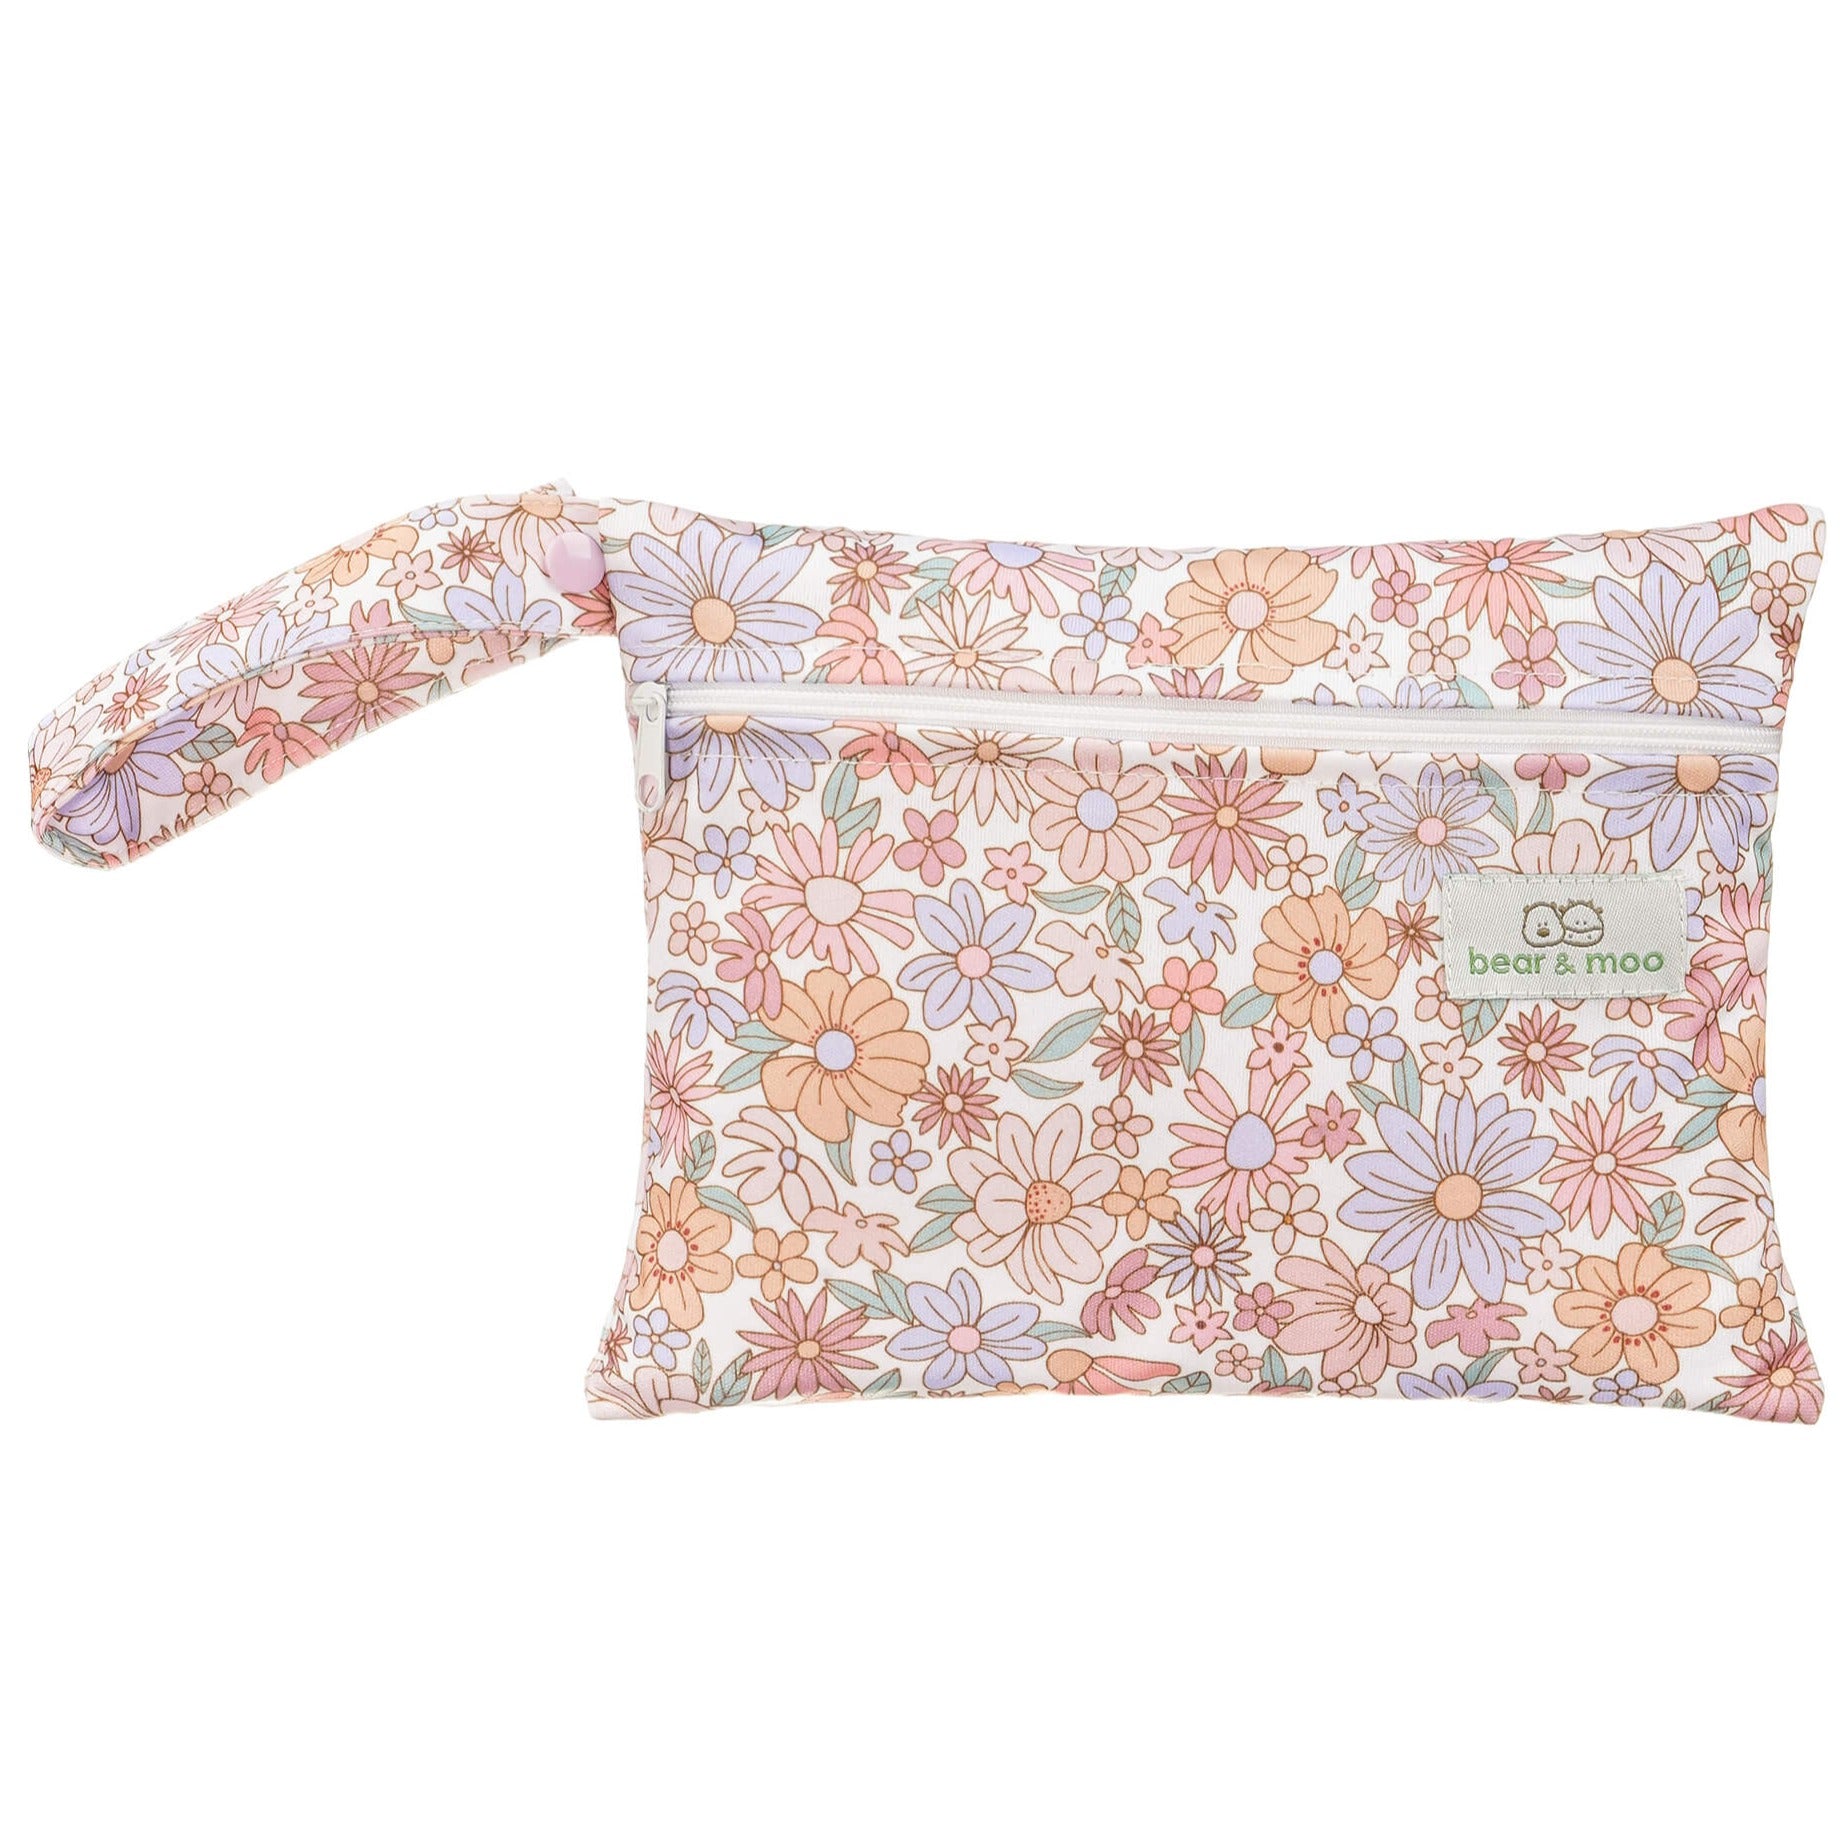 Bear & Moo Reusable Mini Wet Bag in Floral Whimsy print